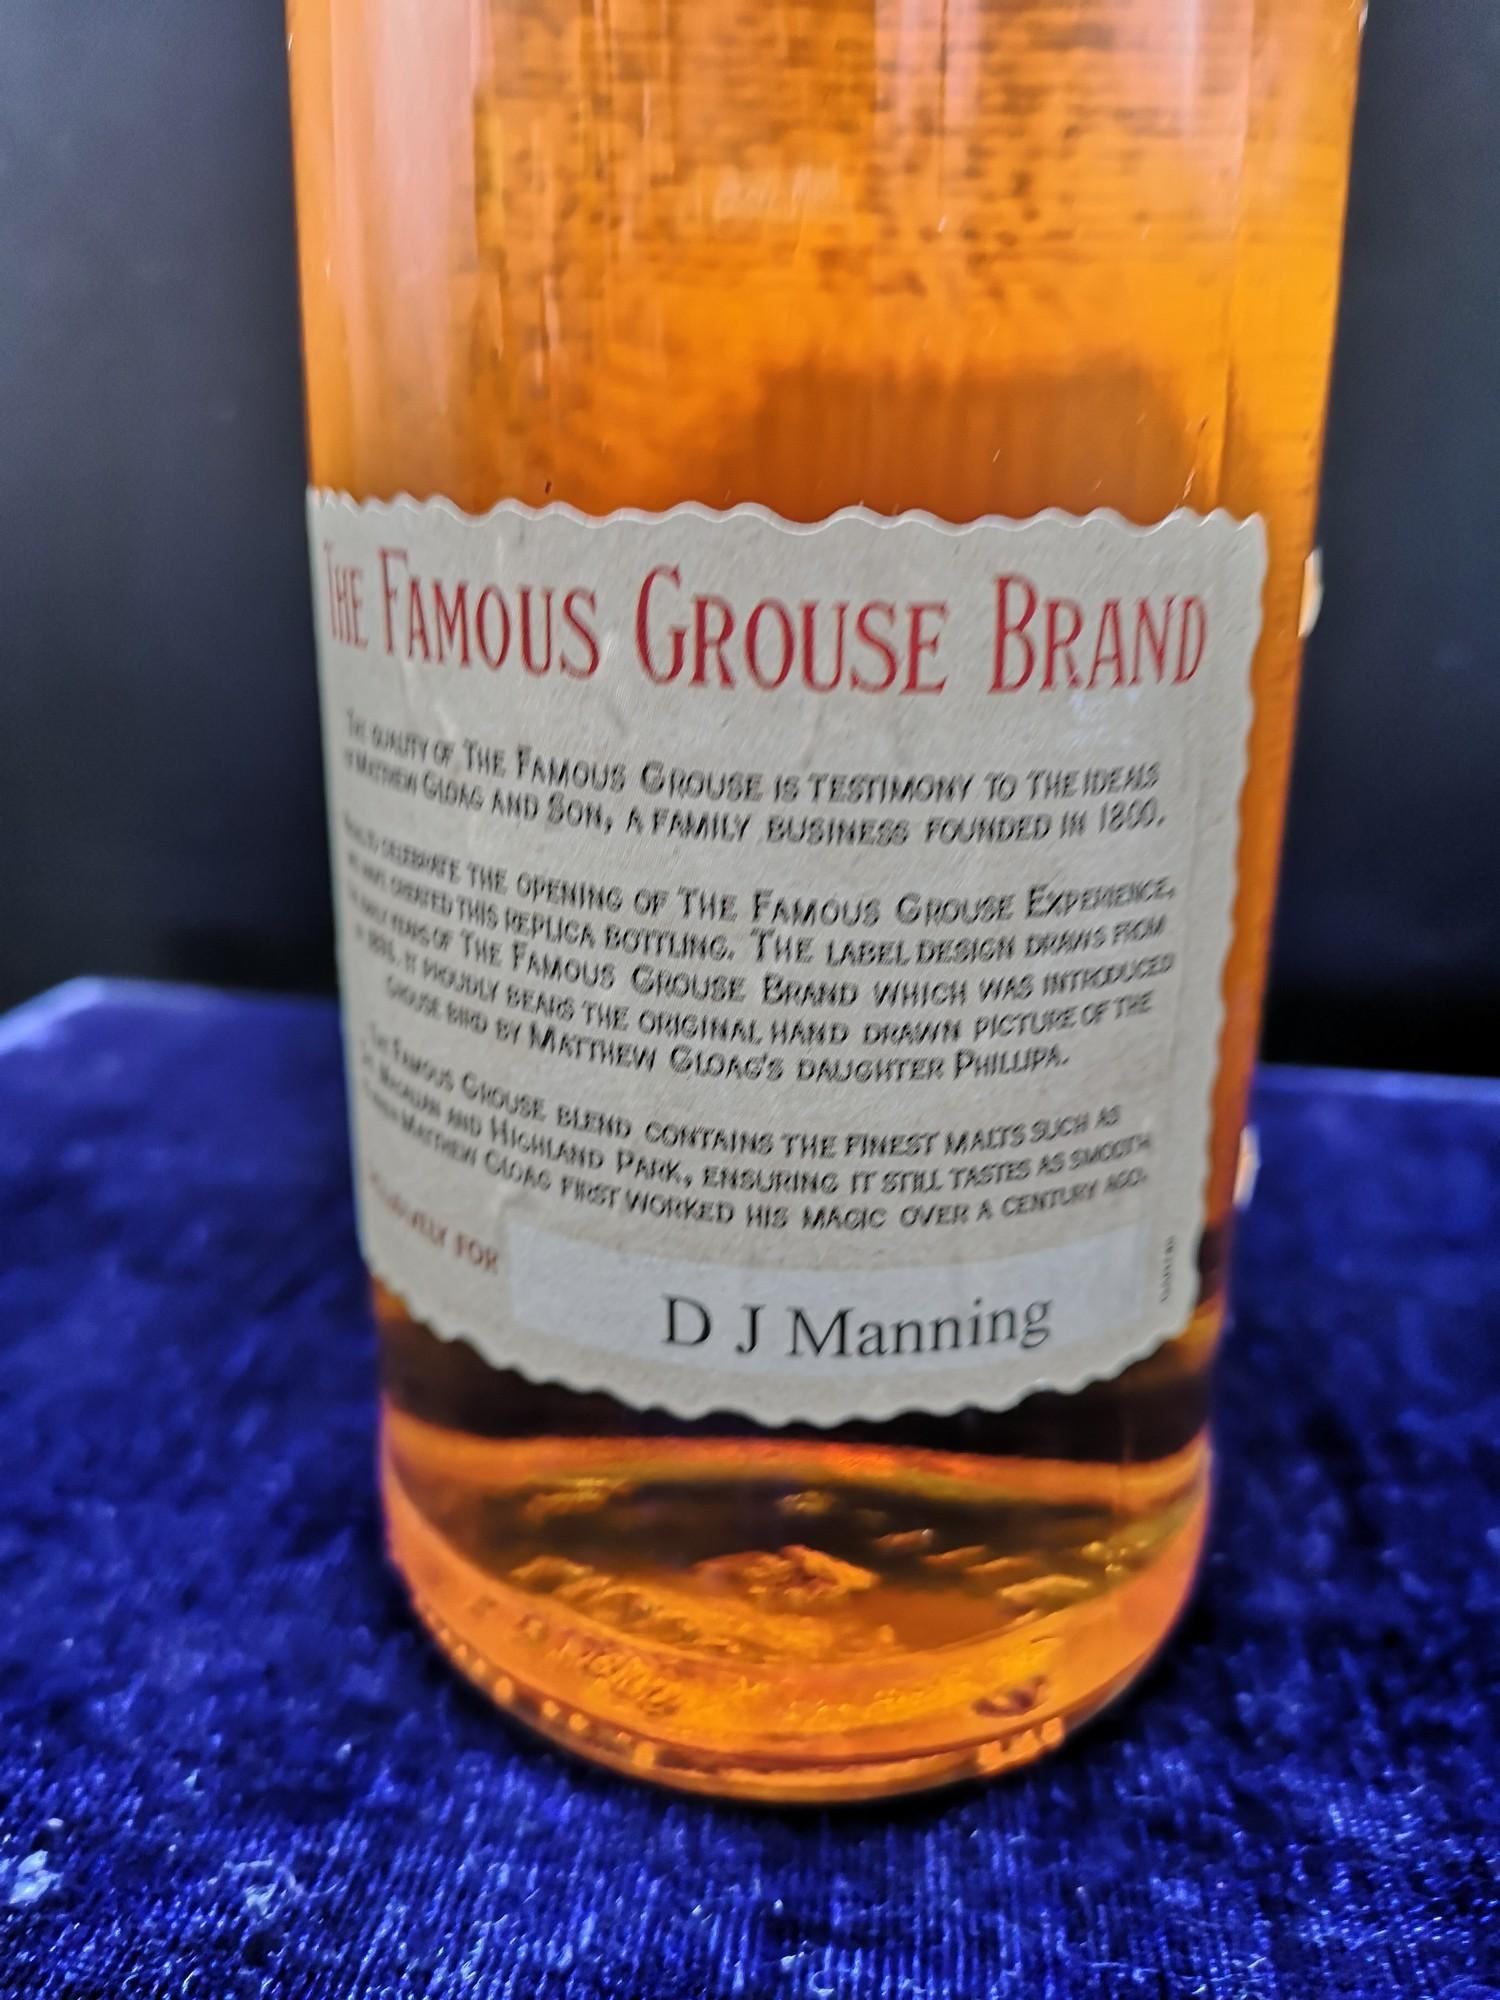 70cl Matthew gloag and sons limited Perth the famous grouse bray whisky full and sealed - Image 2 of 3